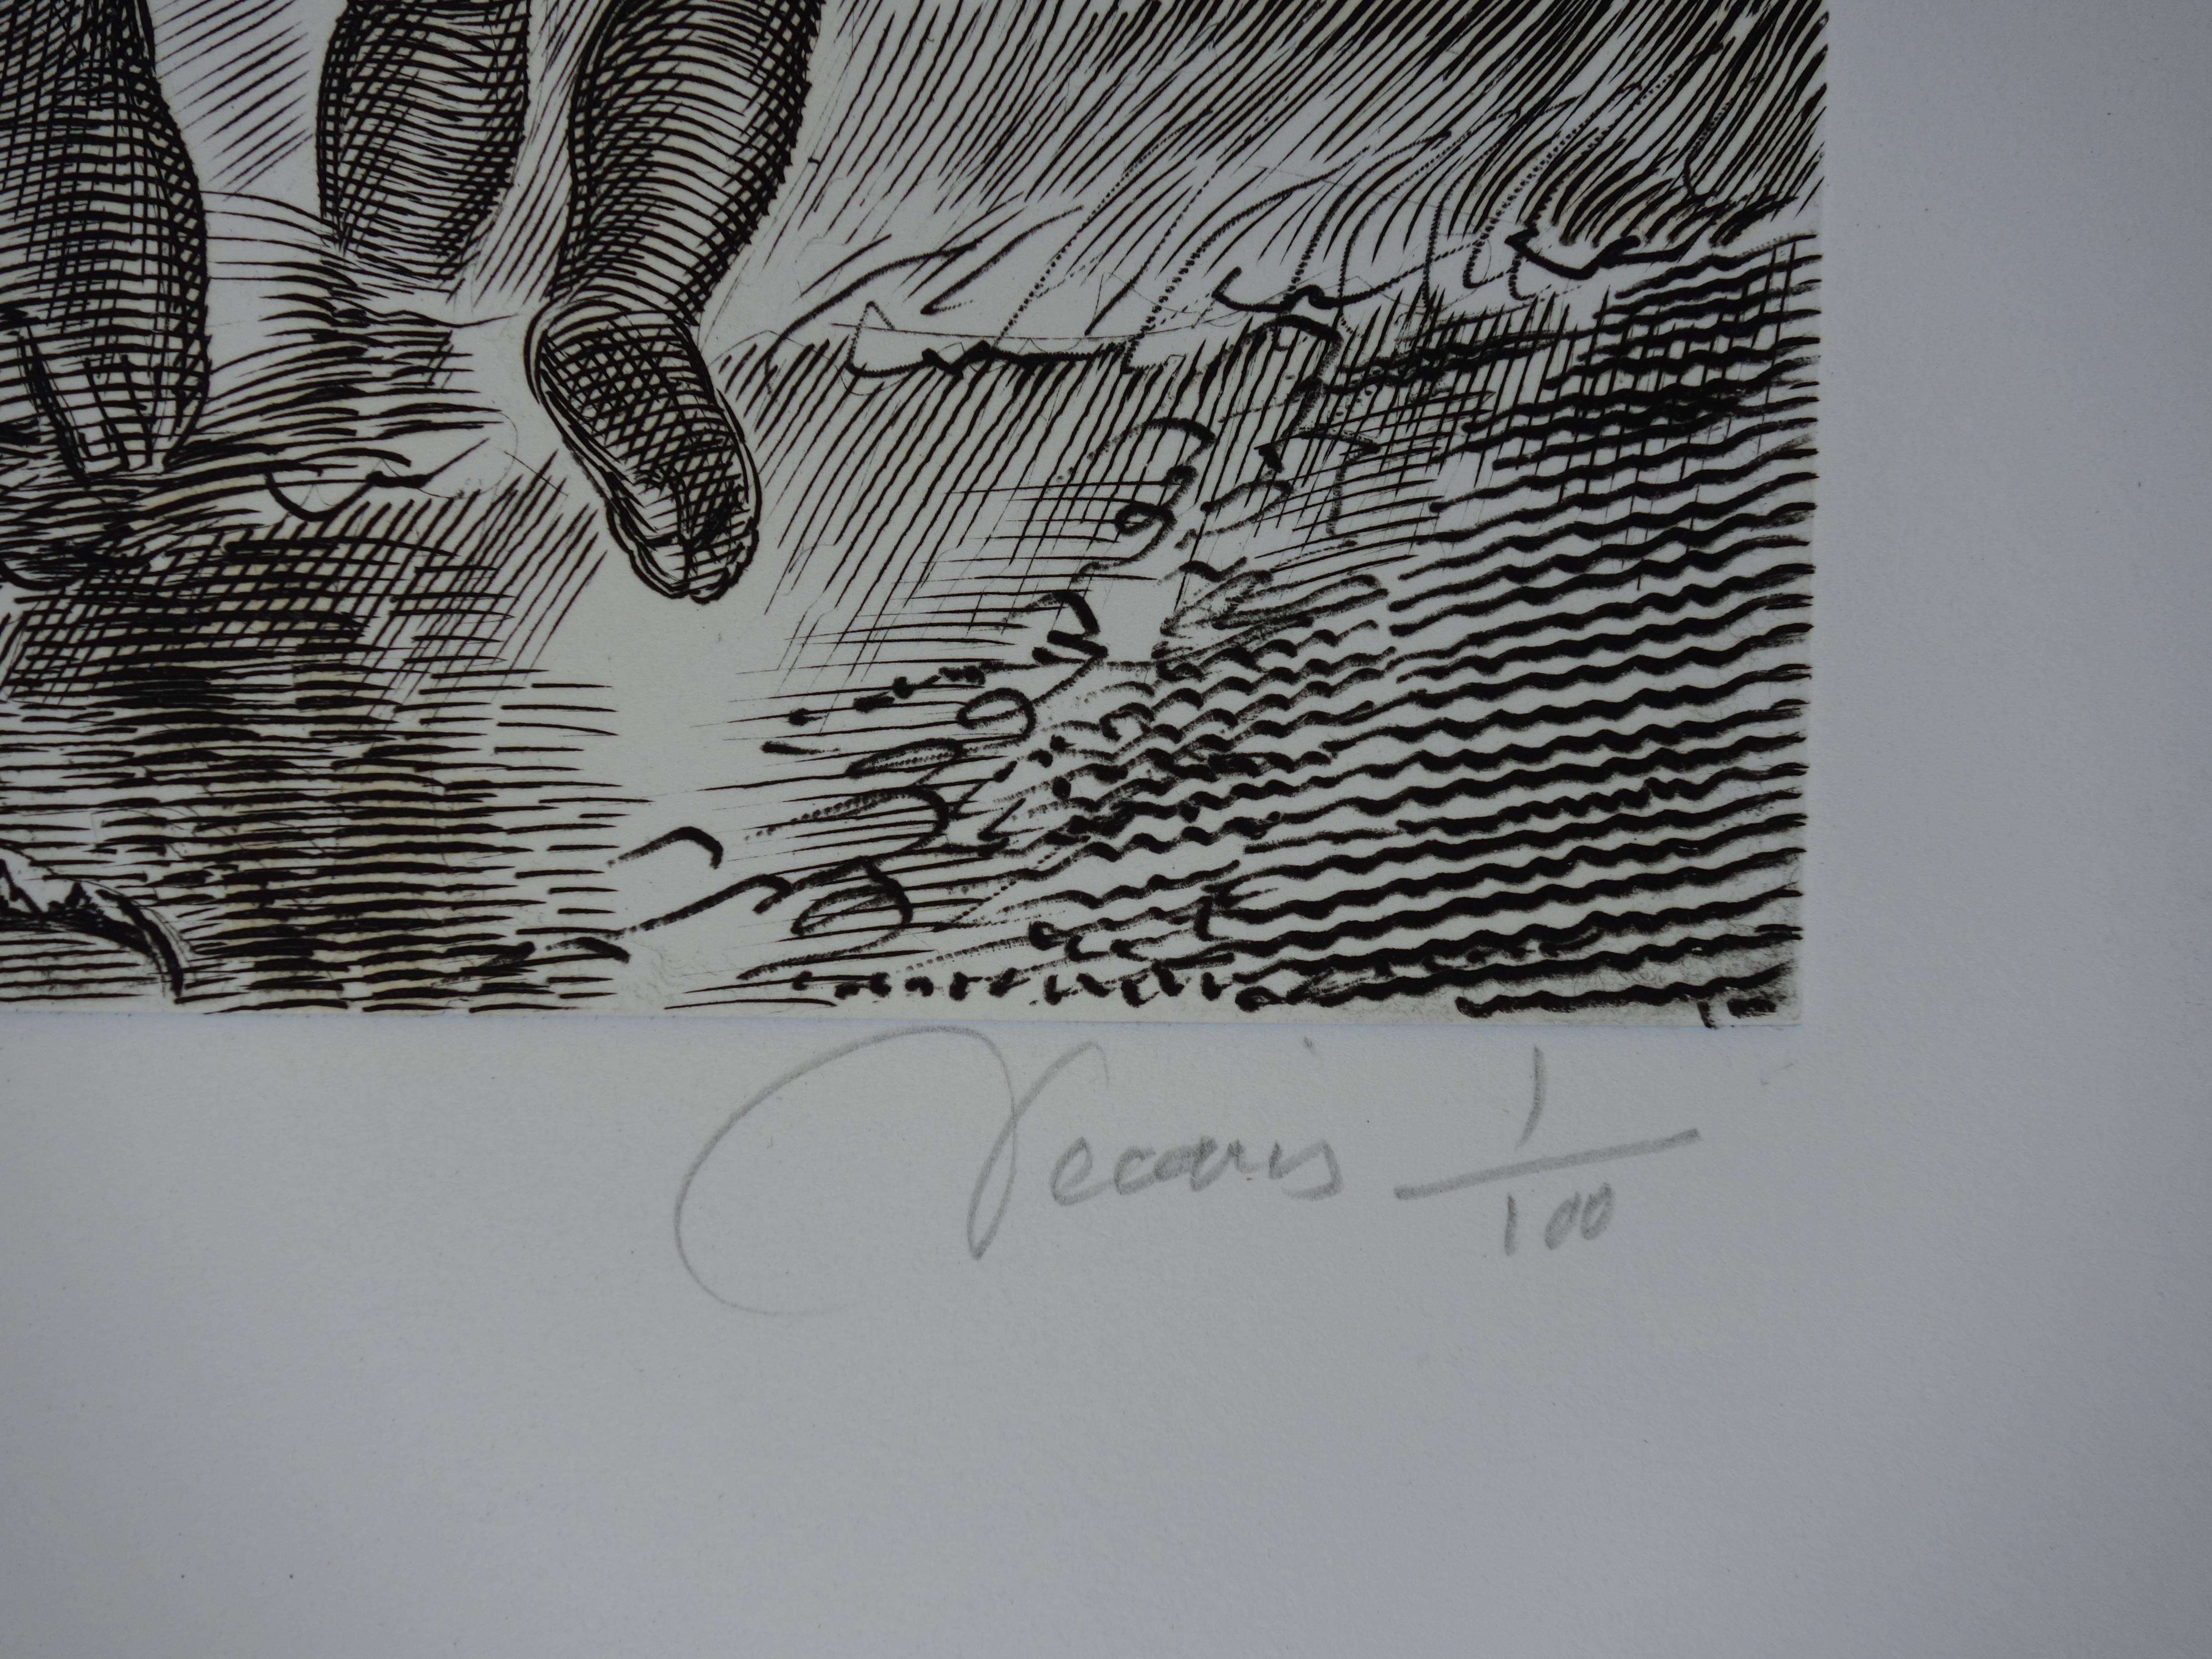 August : Summer Holidays - Original handsigned etching - Exceptional n° 1/100 - Print by Albert Decaris